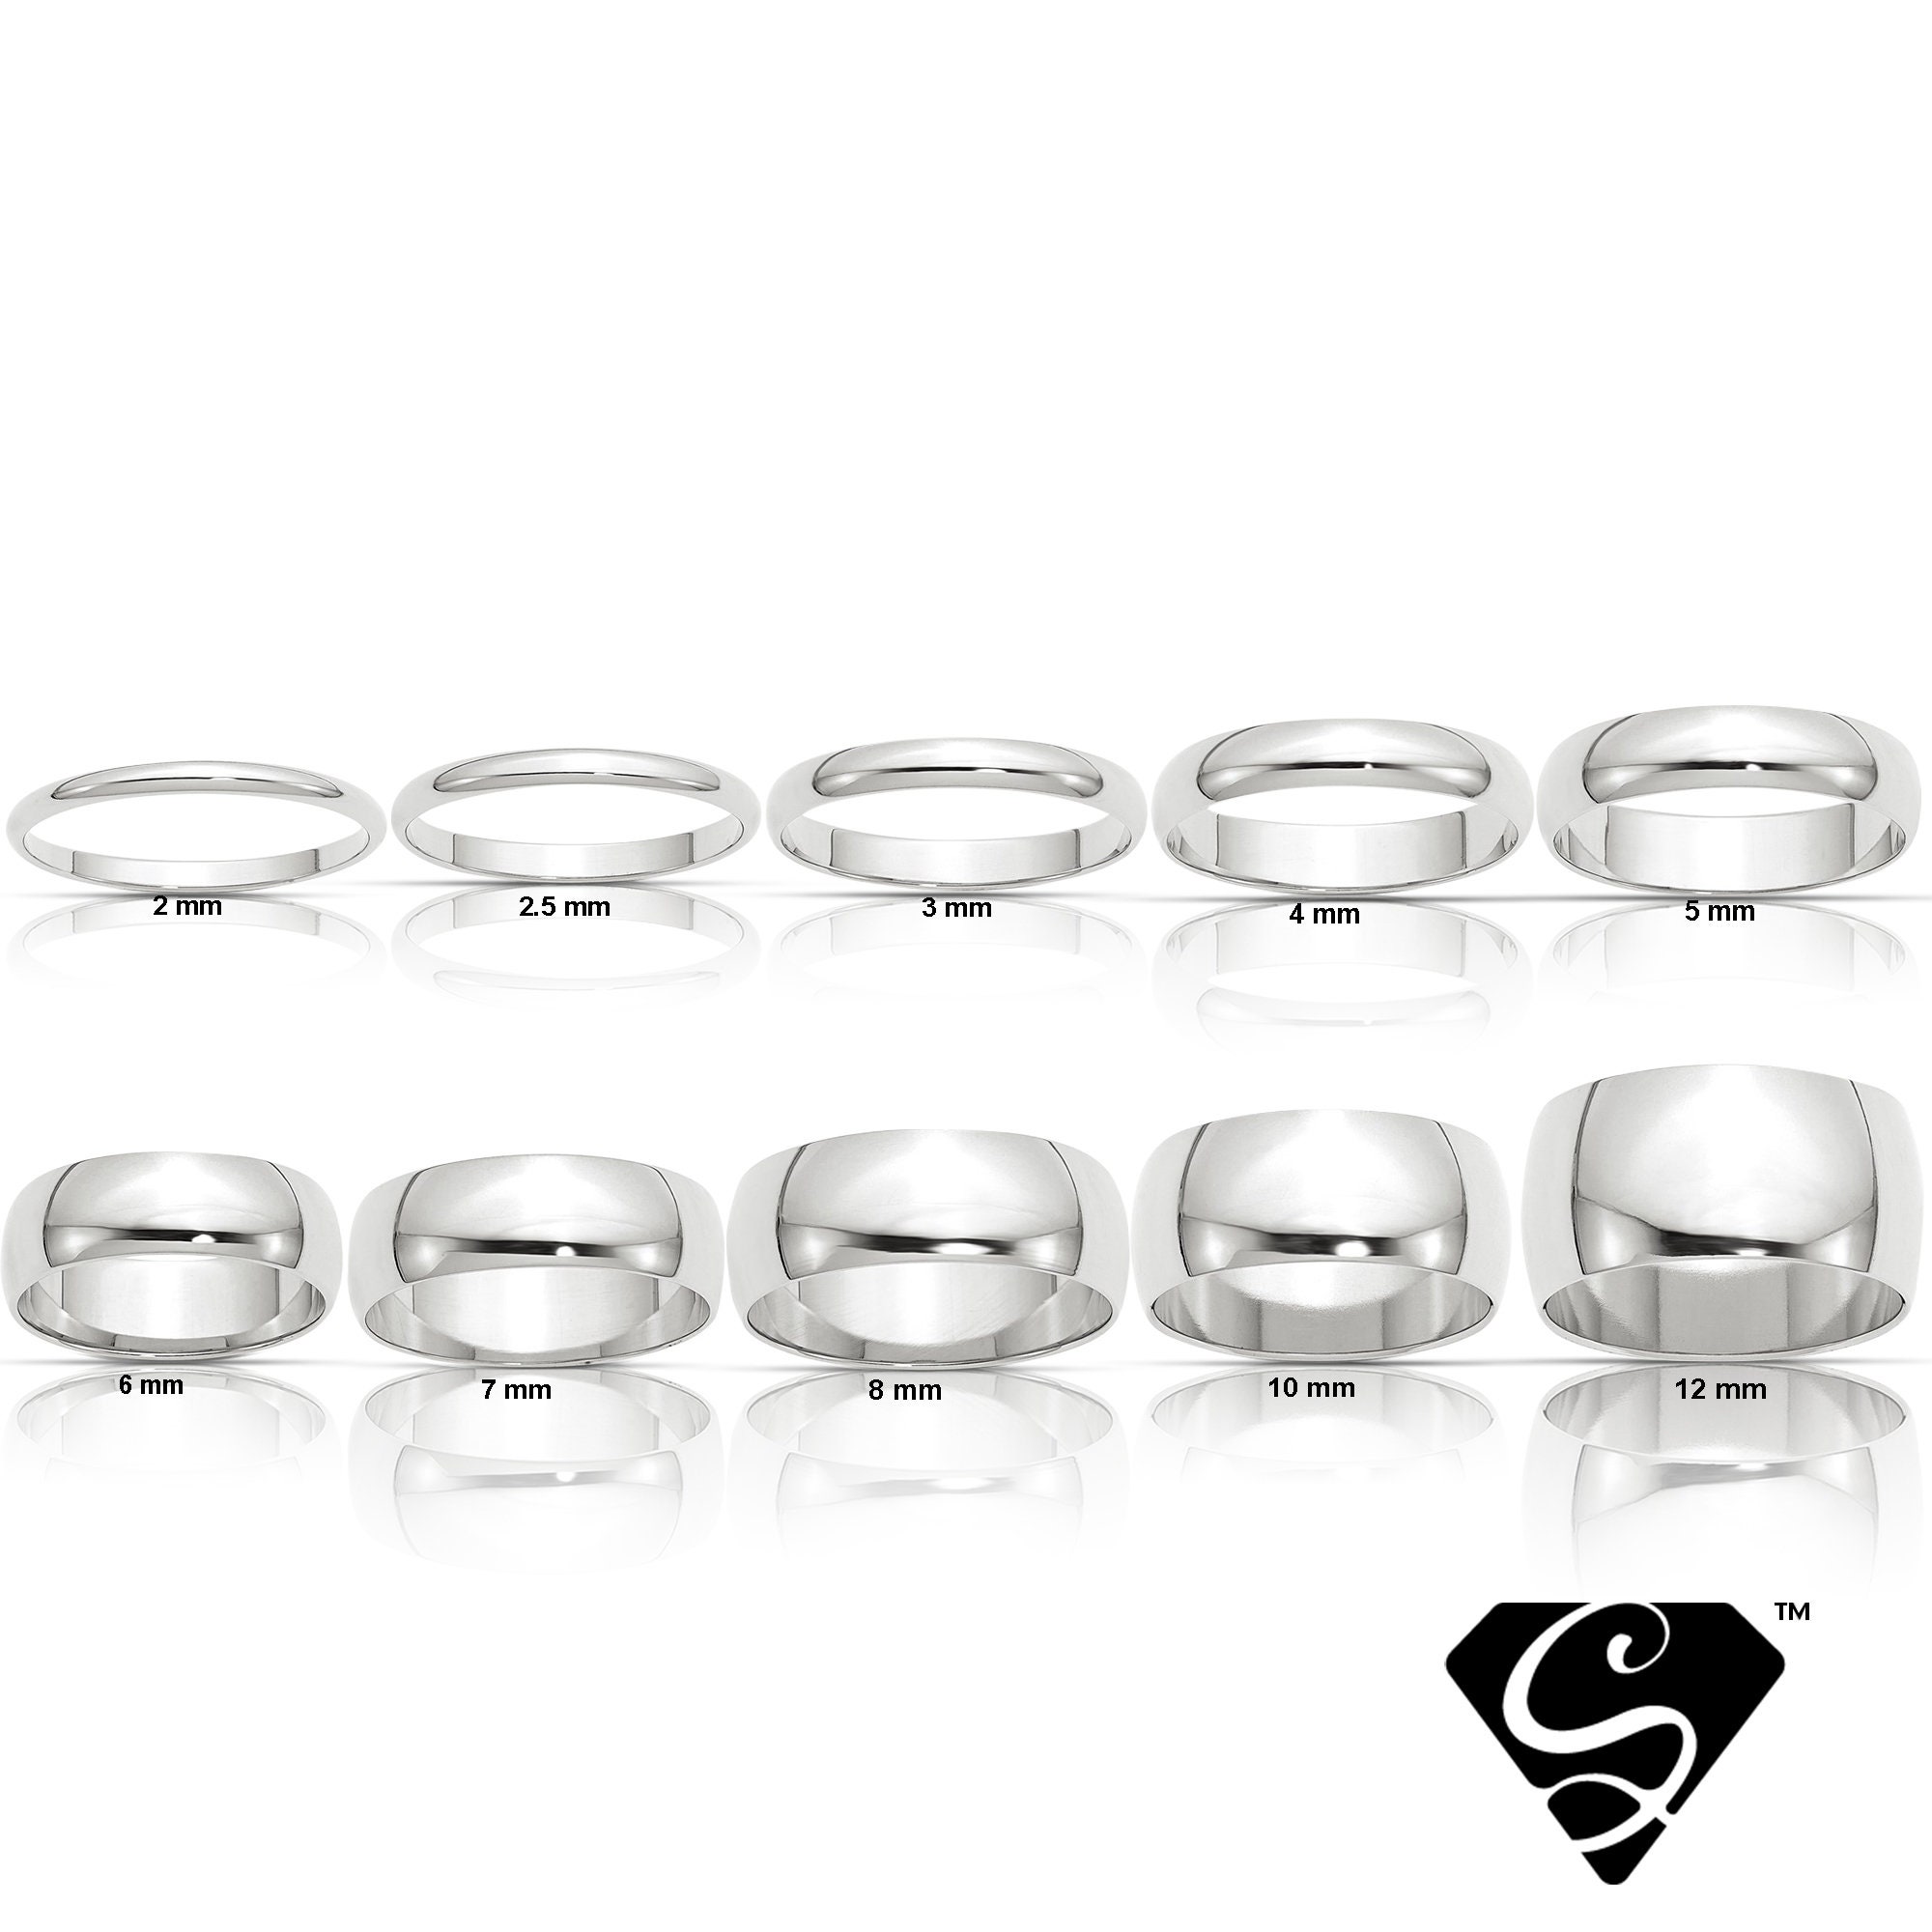 GIRLS SMALL SIZE STERLING SILVER PLAIN  BAND RING 2MM  Wide Sizes G-M